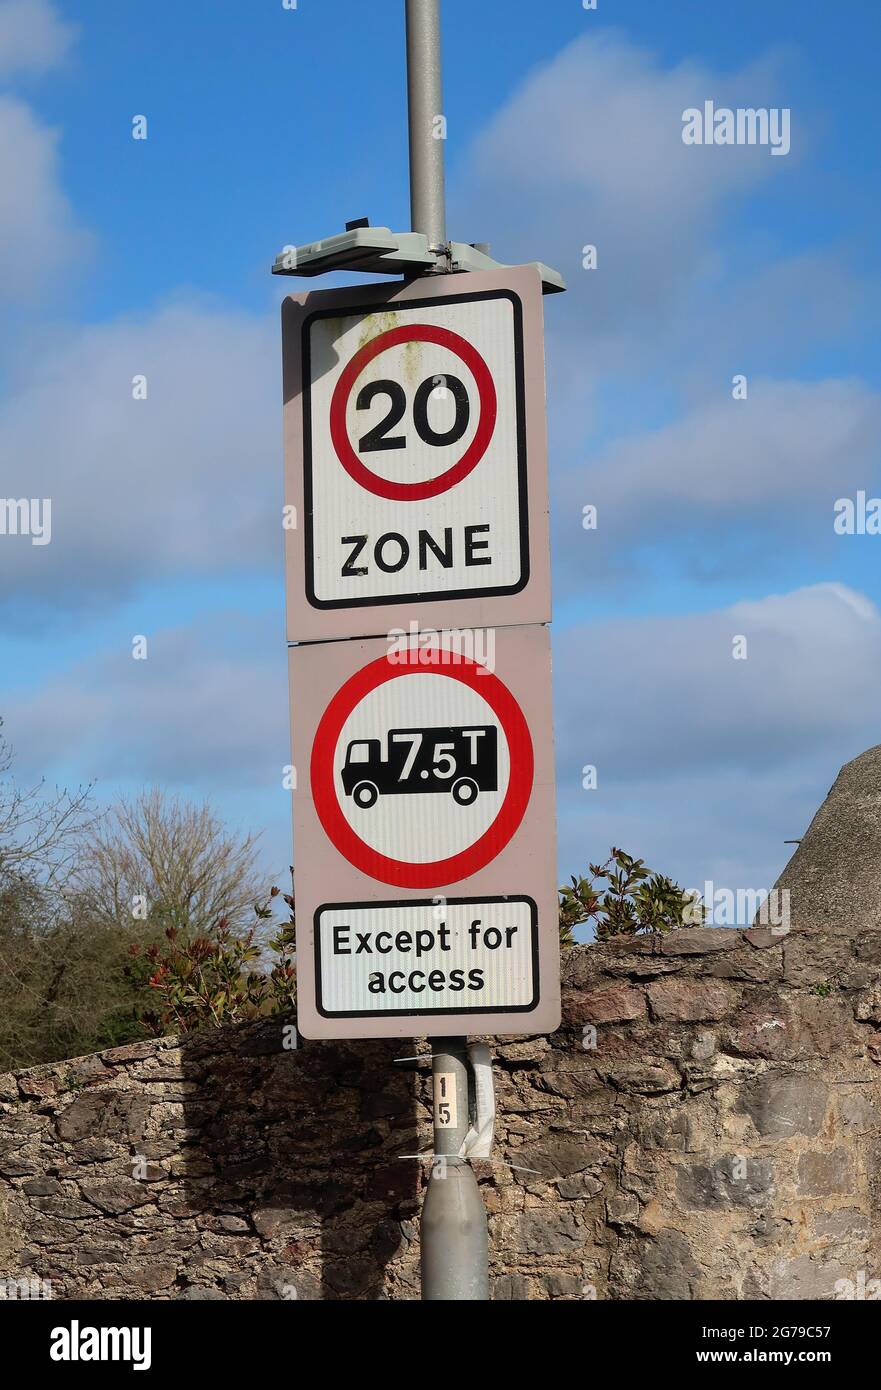 A UK road sign at the start of a 20 mph speed limit zone, where vehicles are restricted to 7.5 tons, except for access. Stock Photo